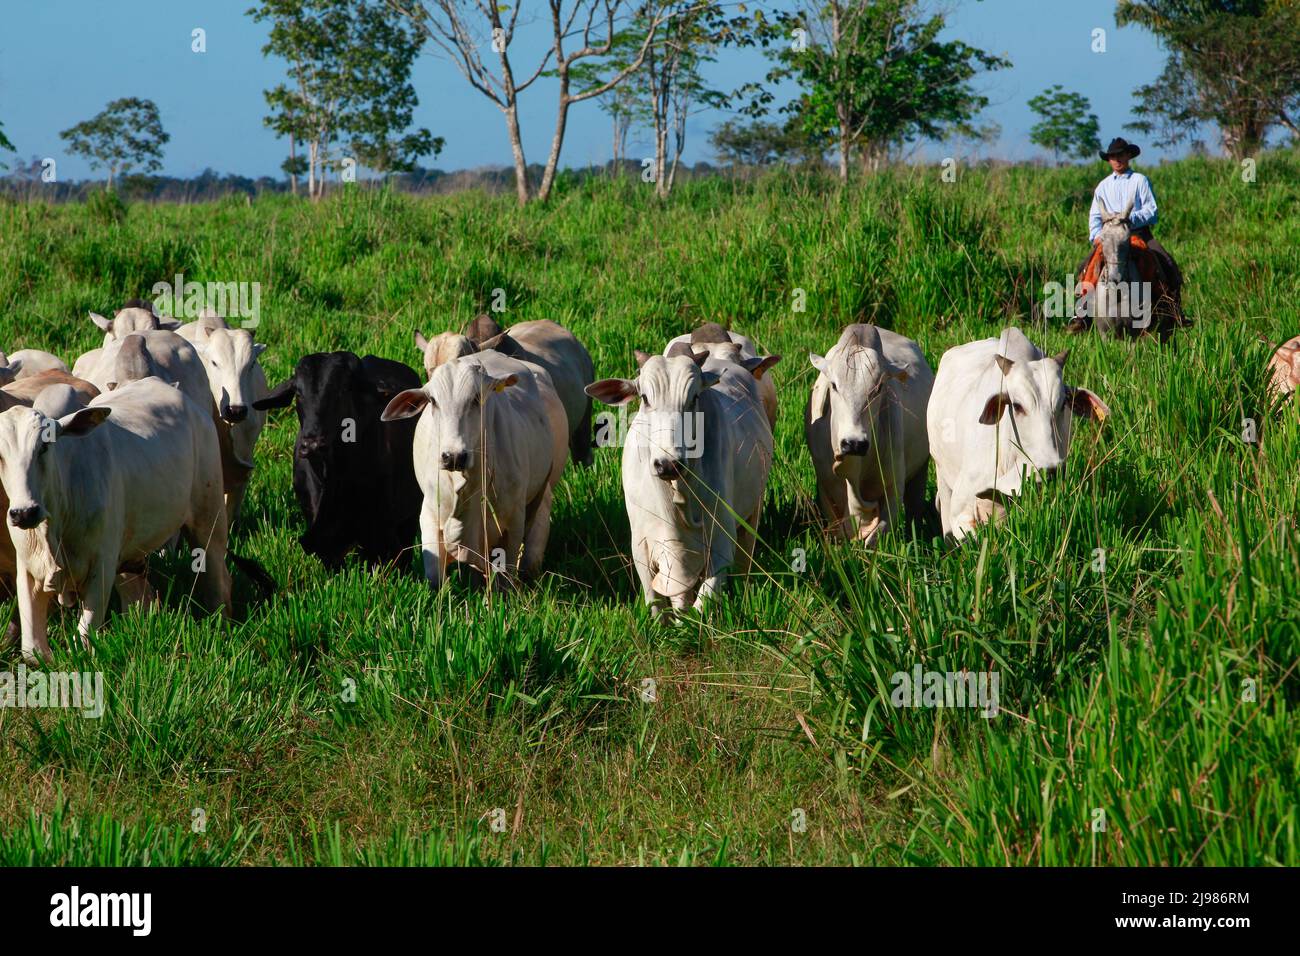 Herd of cattle on pasture, with farmer on the background riding horse on grassland, wearing cowboy hat. Brazil, Pará State, Amazon. Stock Photo